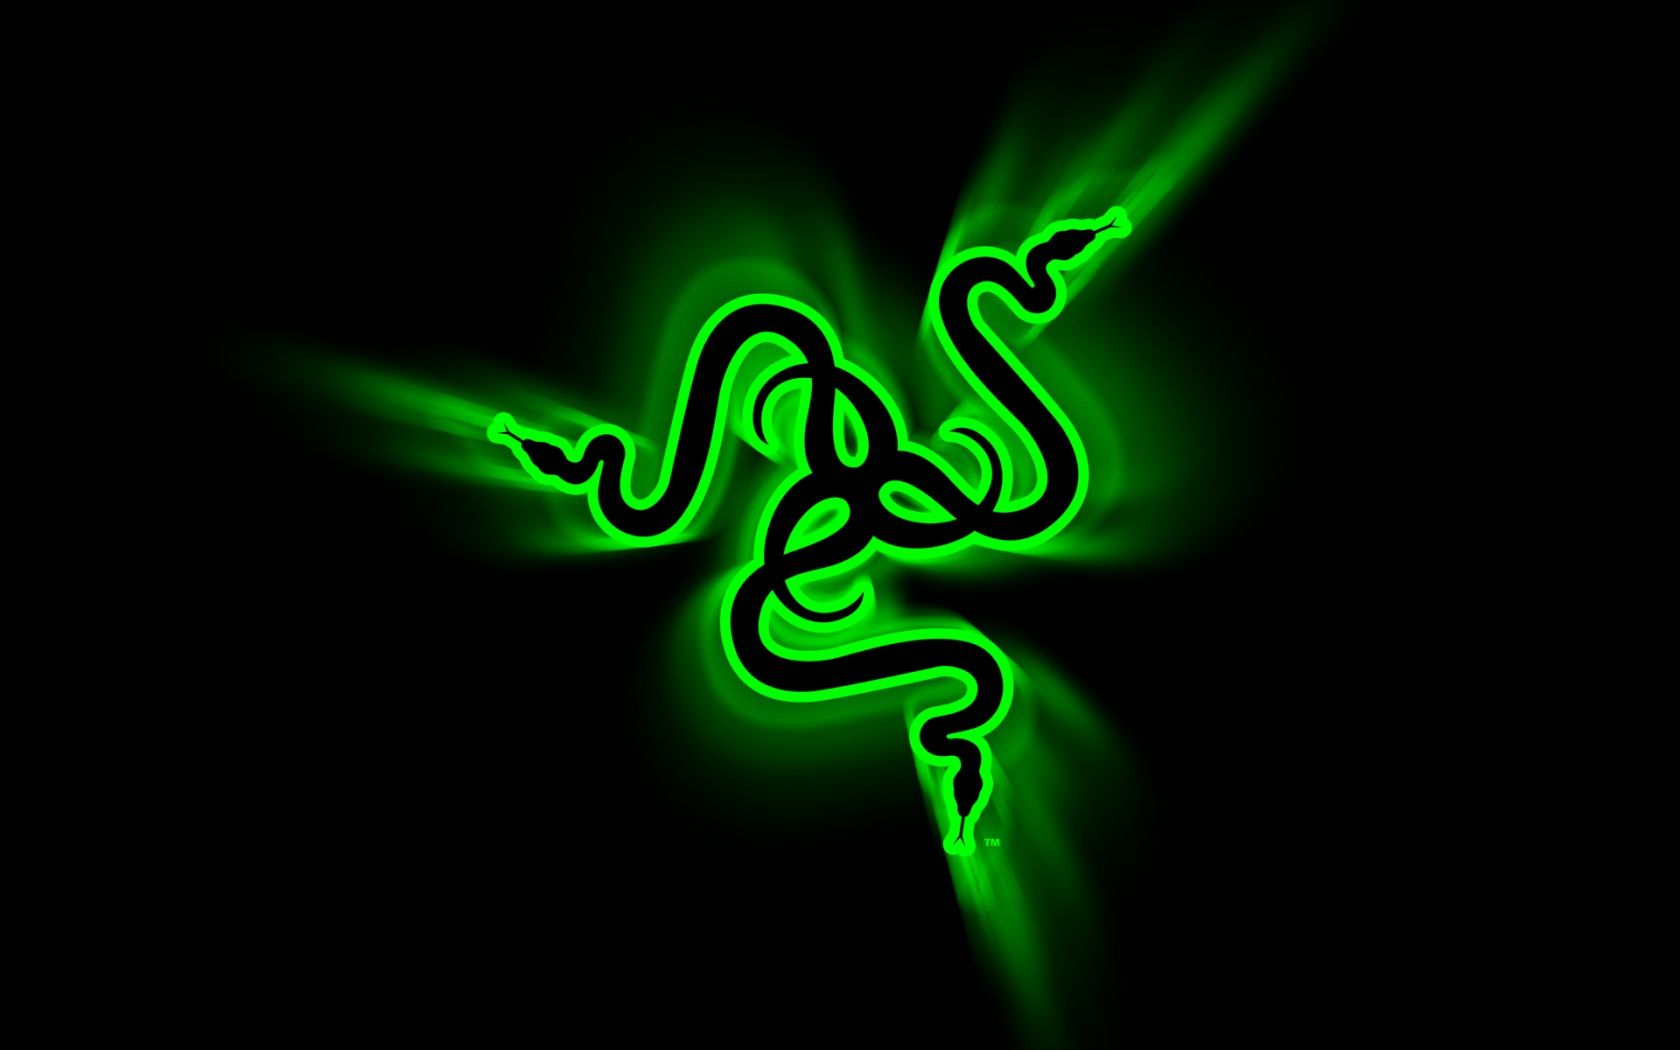 razer iphone wallpaper 9   Images And Wallpapers   all to 1680x1050